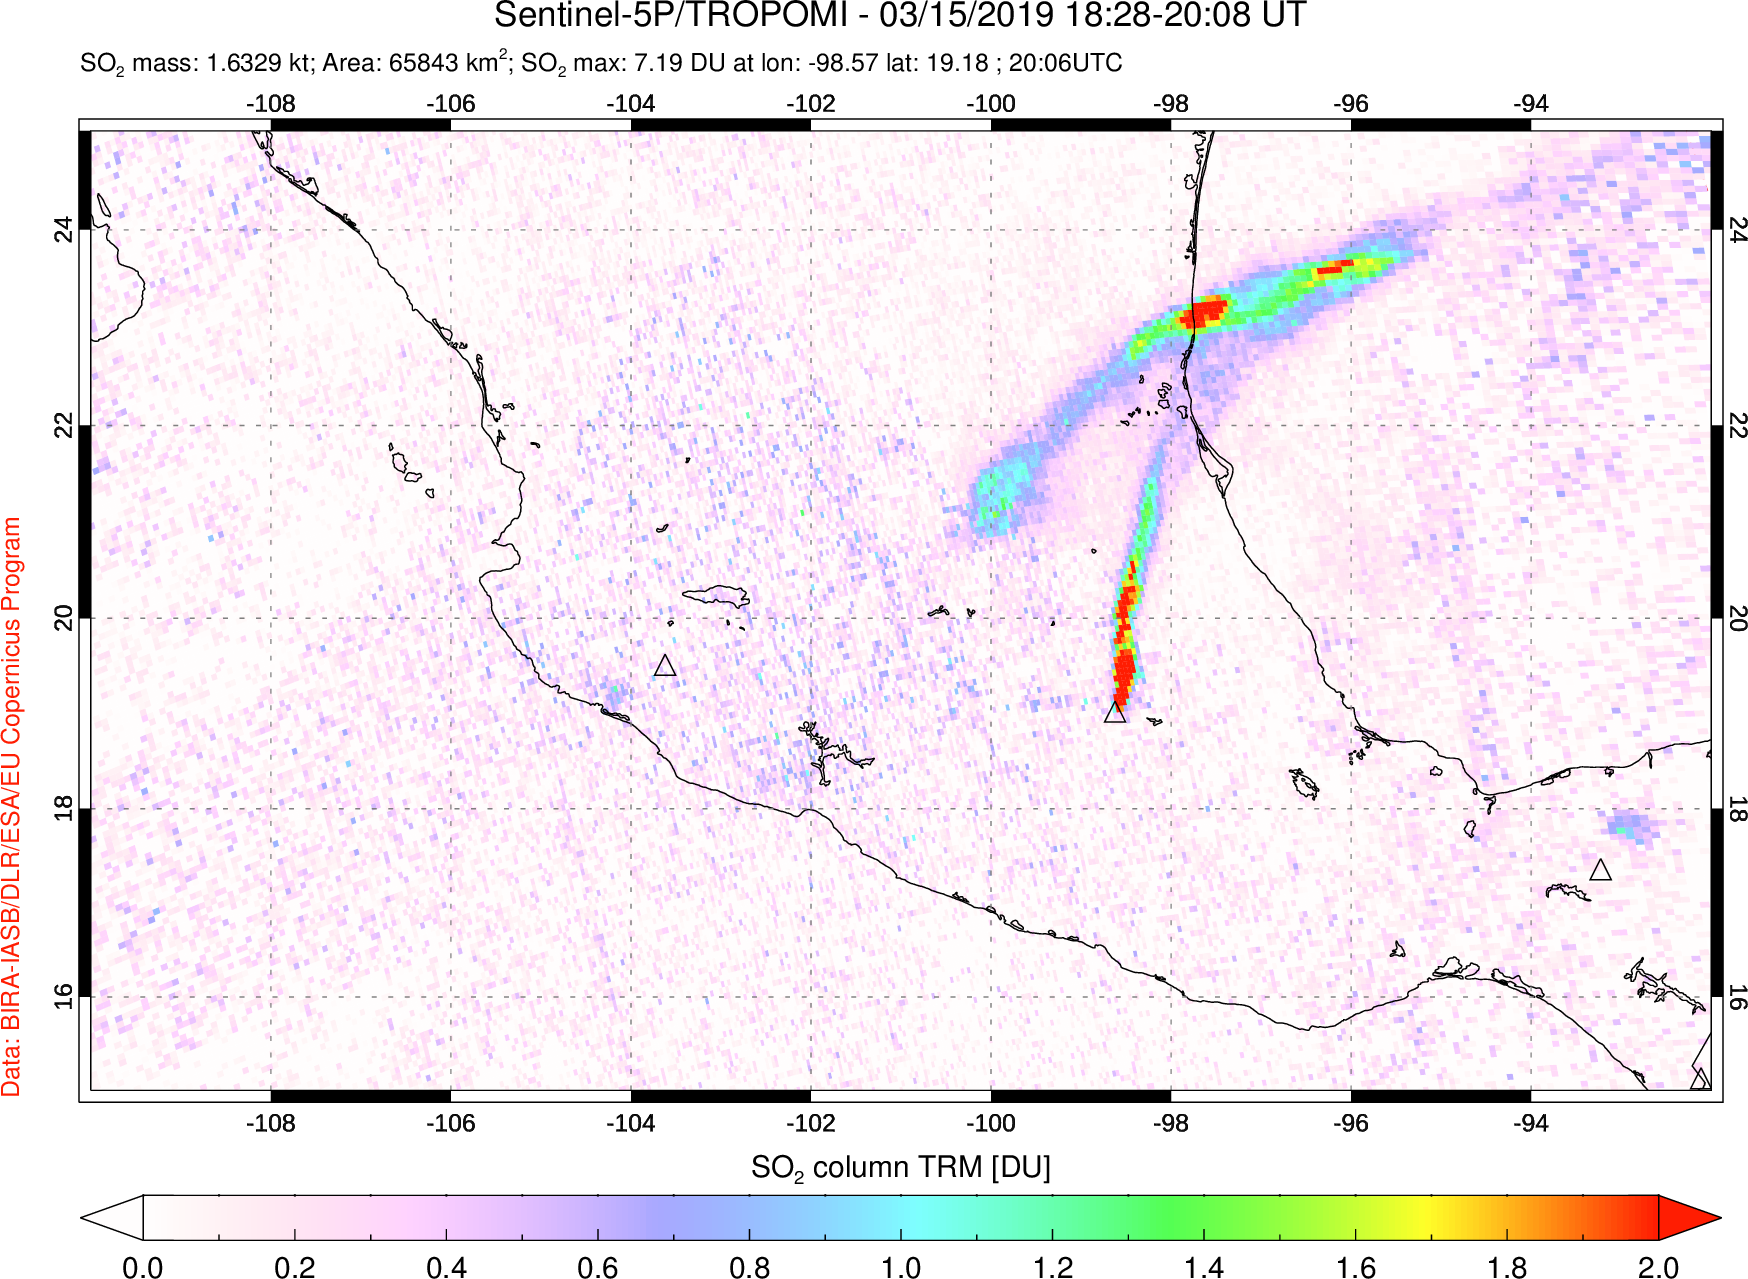 A sulfur dioxide image over Mexico on Mar 15, 2019.